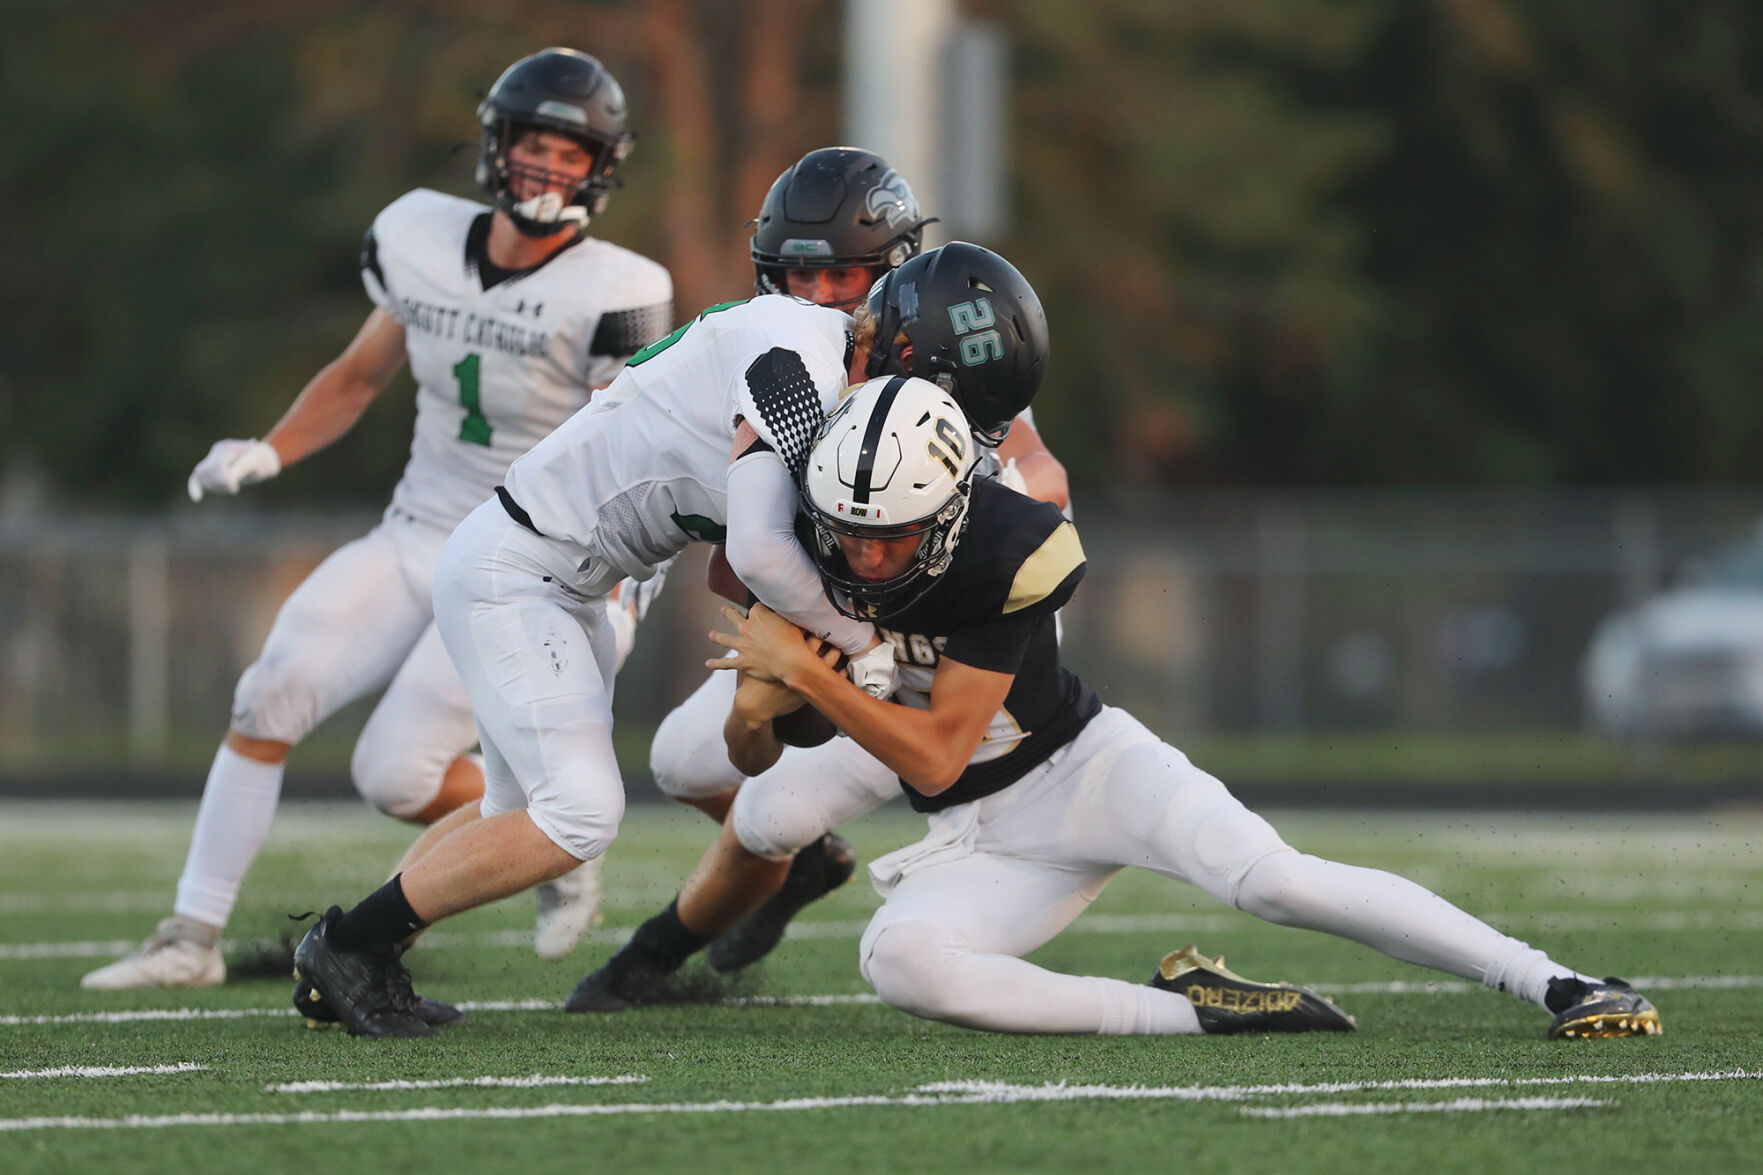 Omaha Skutt secures a 30-14 victory over Grand Island Northwest